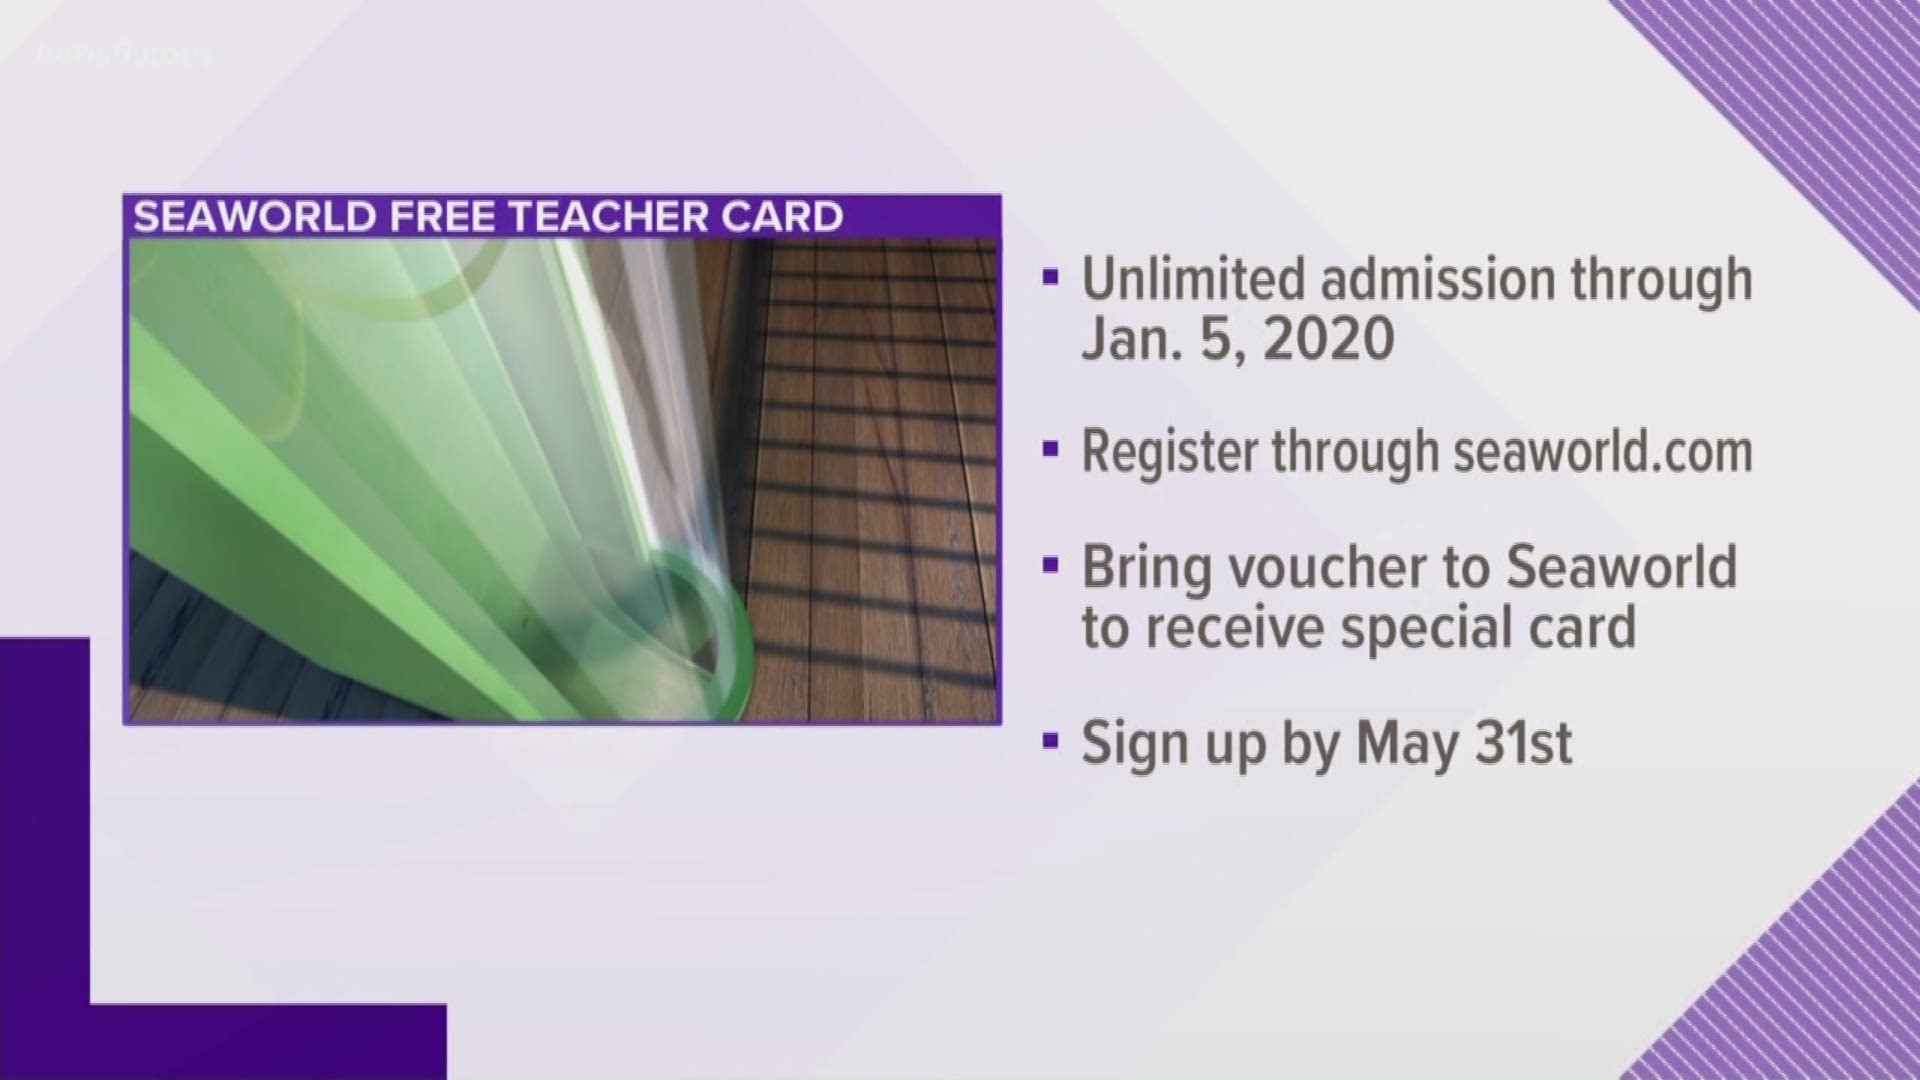 Teachers in the Lone Star State can take advantage of a limited-time offer at SeaWorld San Antonio - the new Teacher Card.

The offer is available to all Texas credentialed Pre-K-12 school teachers through May 31. Teachers need to register through SeaWorld's website to receive a voucher, which is then brought to SeaWorld San Antonio and redeemed for the special card.